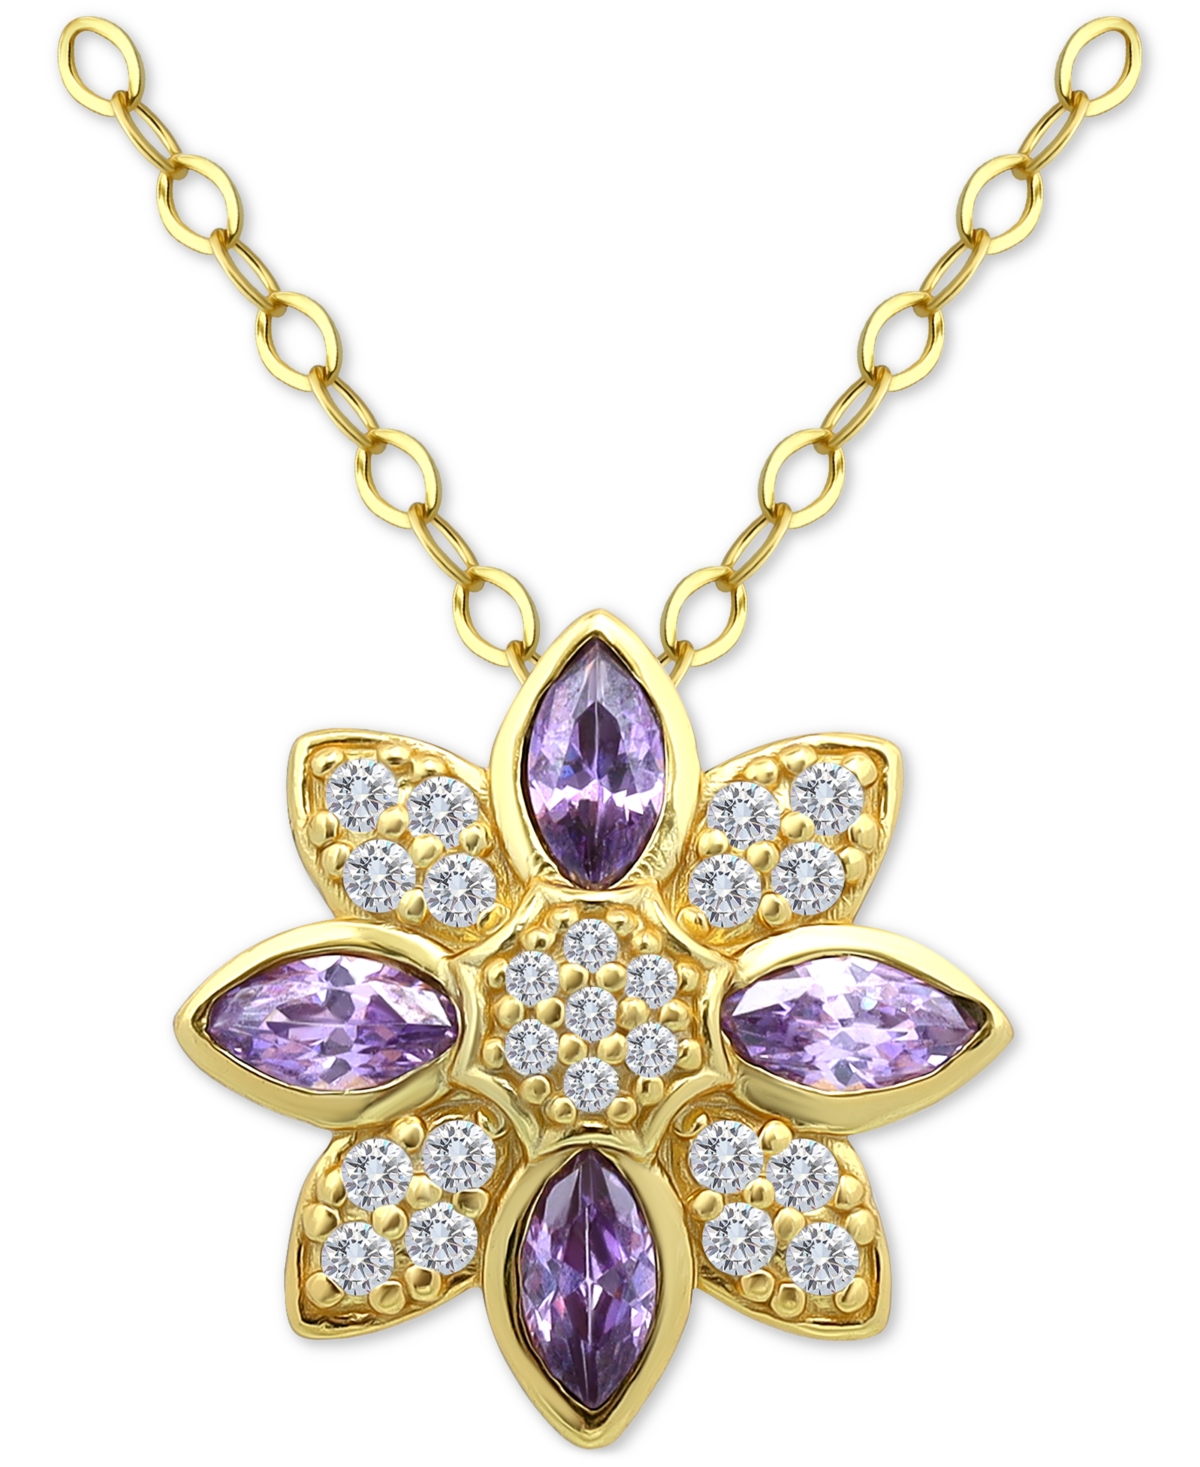 Giani Bernini Cubic Zirconia Marquise & Pave Flower Pendant Necklace In 18k Gold-plated Sterling Silver, 16" + 2"